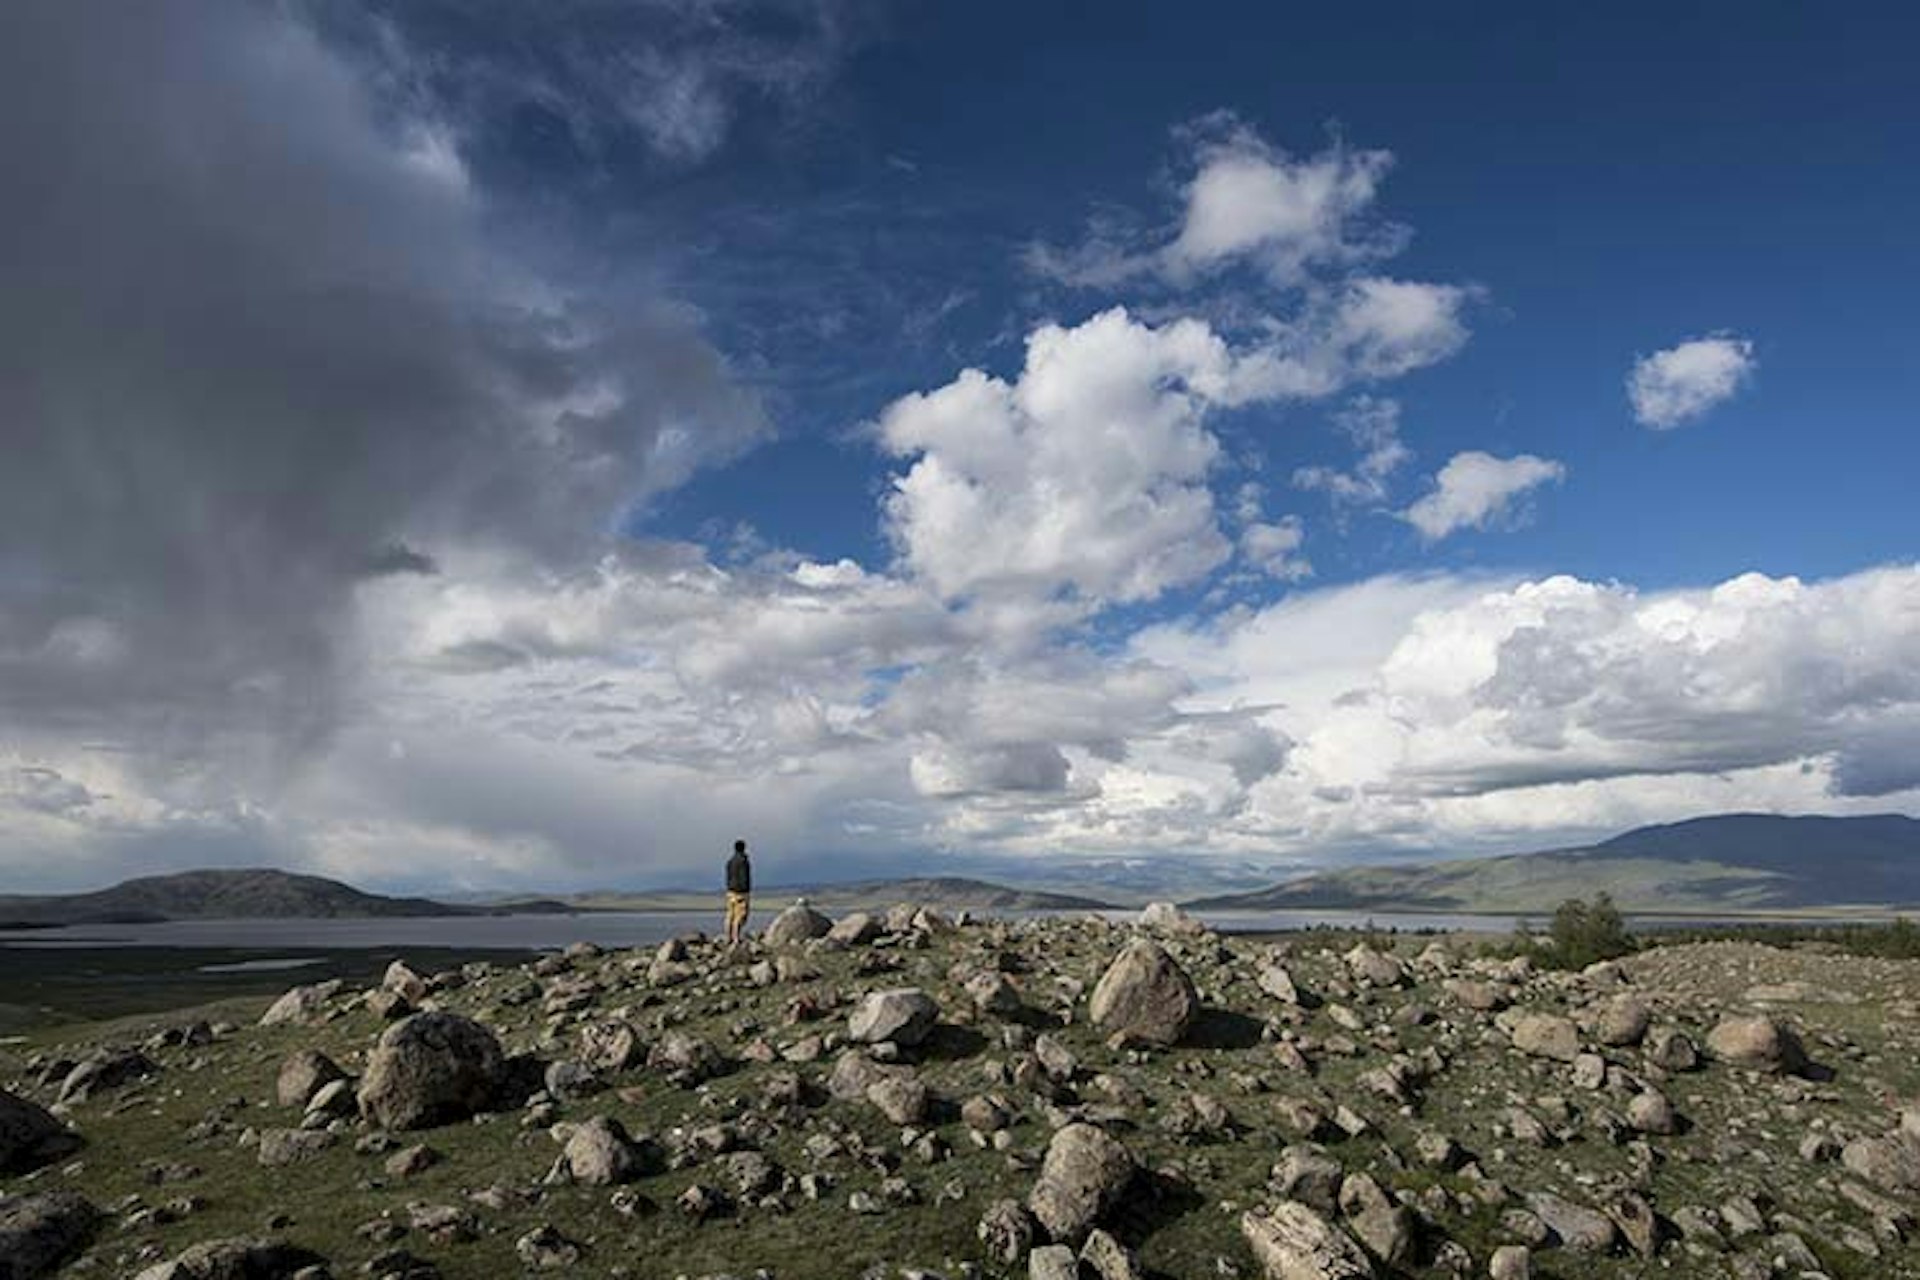 Big sky in the Upper Dayan Valley. Image by David Baxendale / Lonely Planet